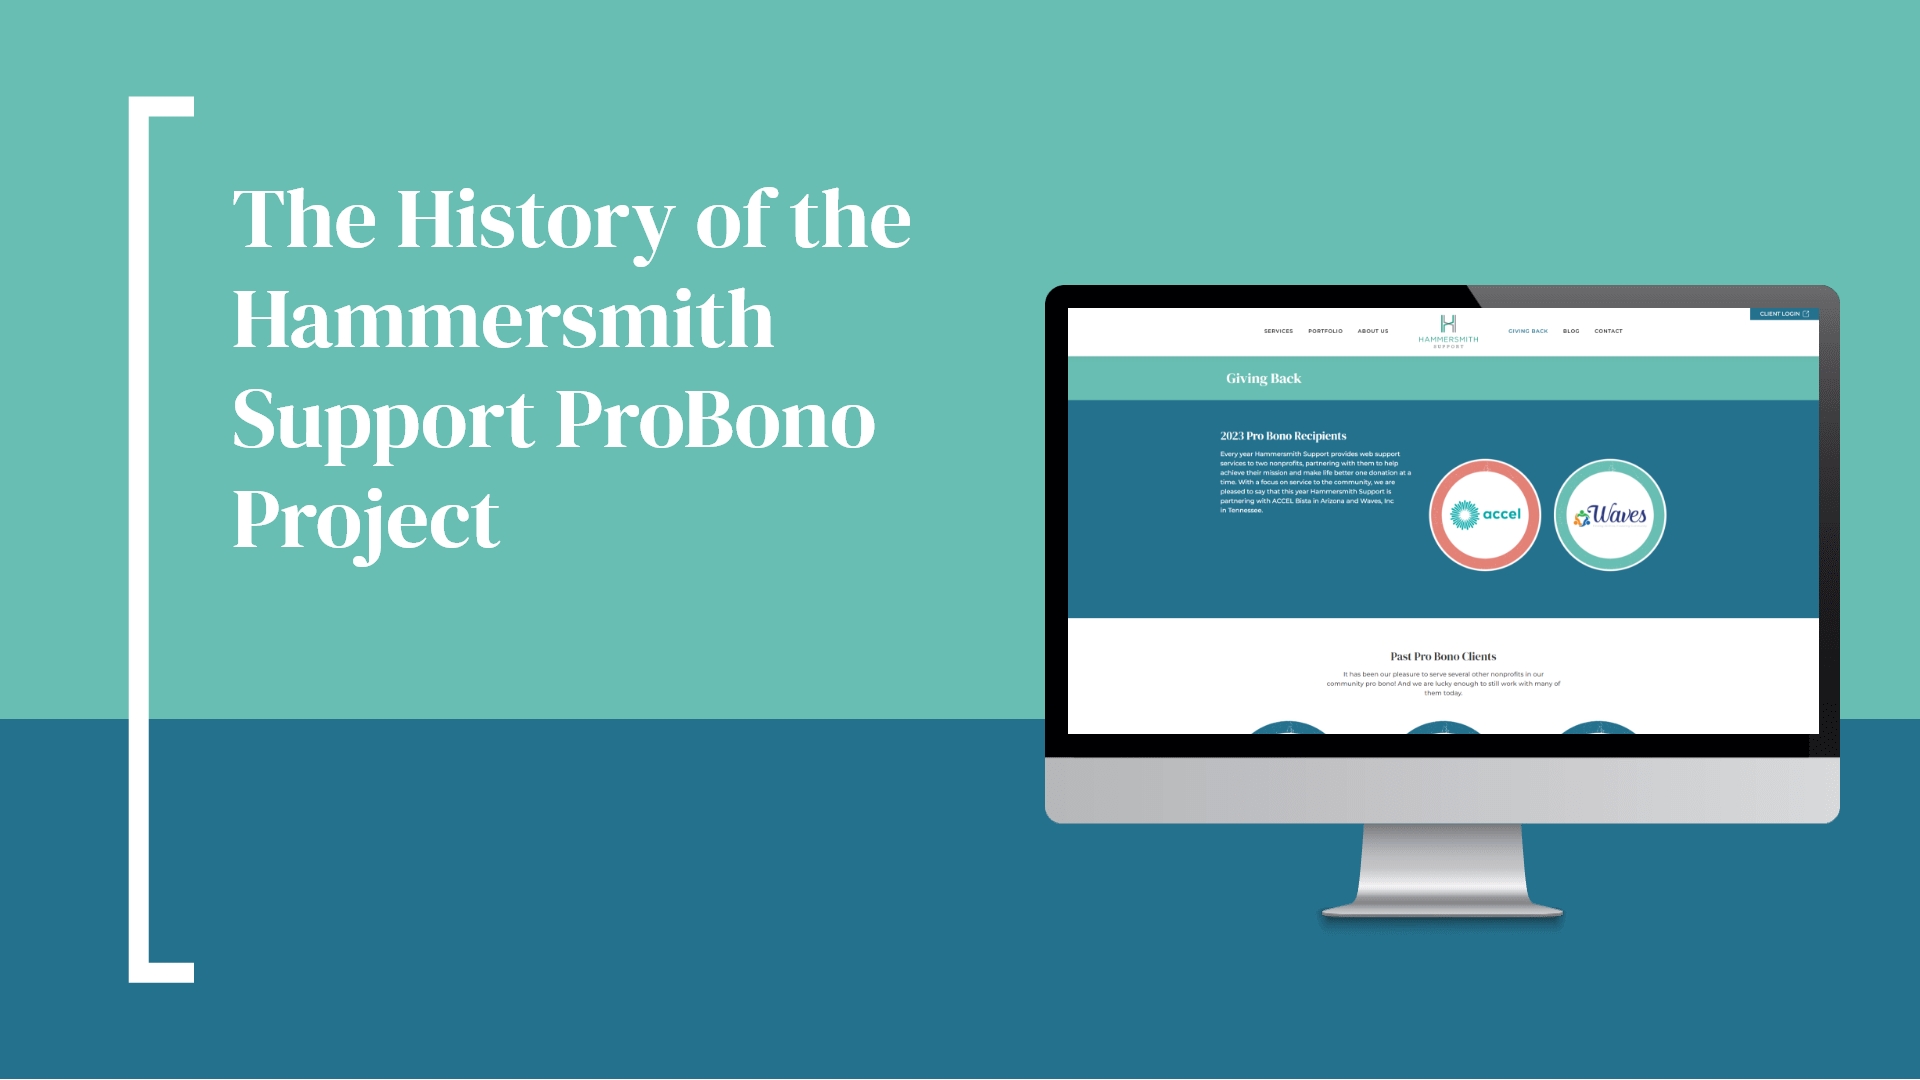 The History of the Hammersmith Support ProBono Project